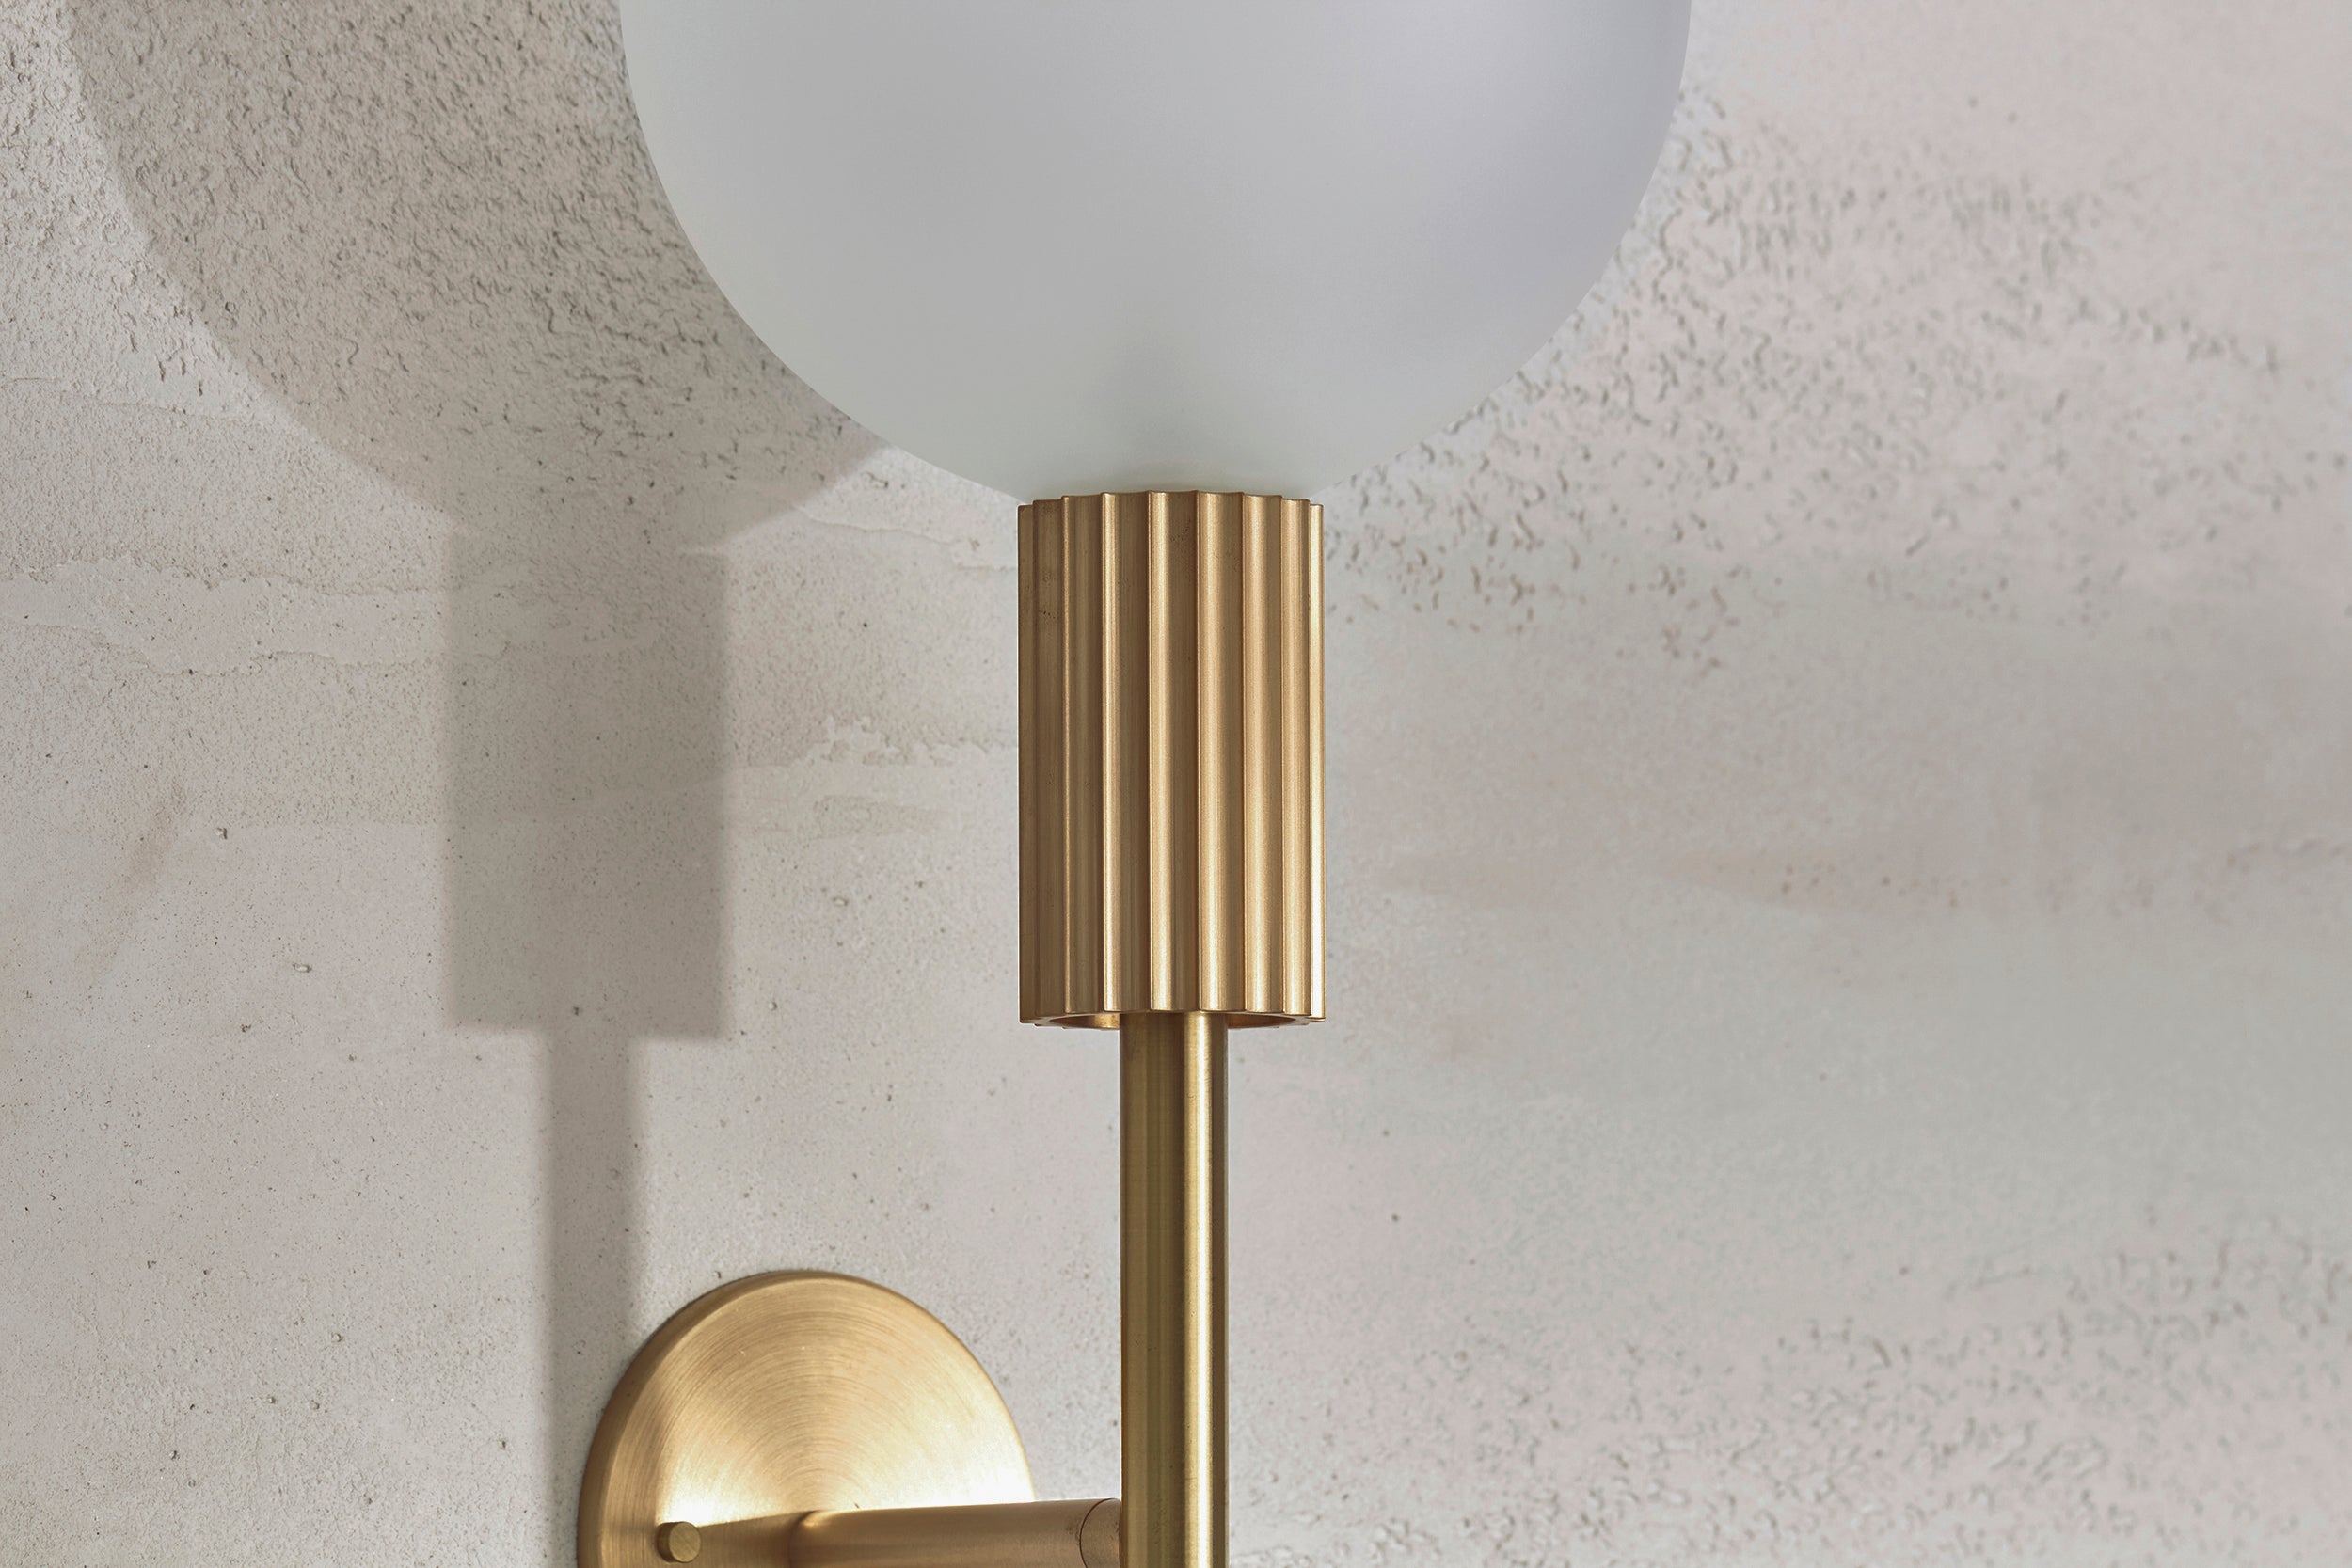 Attalos Wall Light, G200 detail. Photographed by Lawrence Furzey.